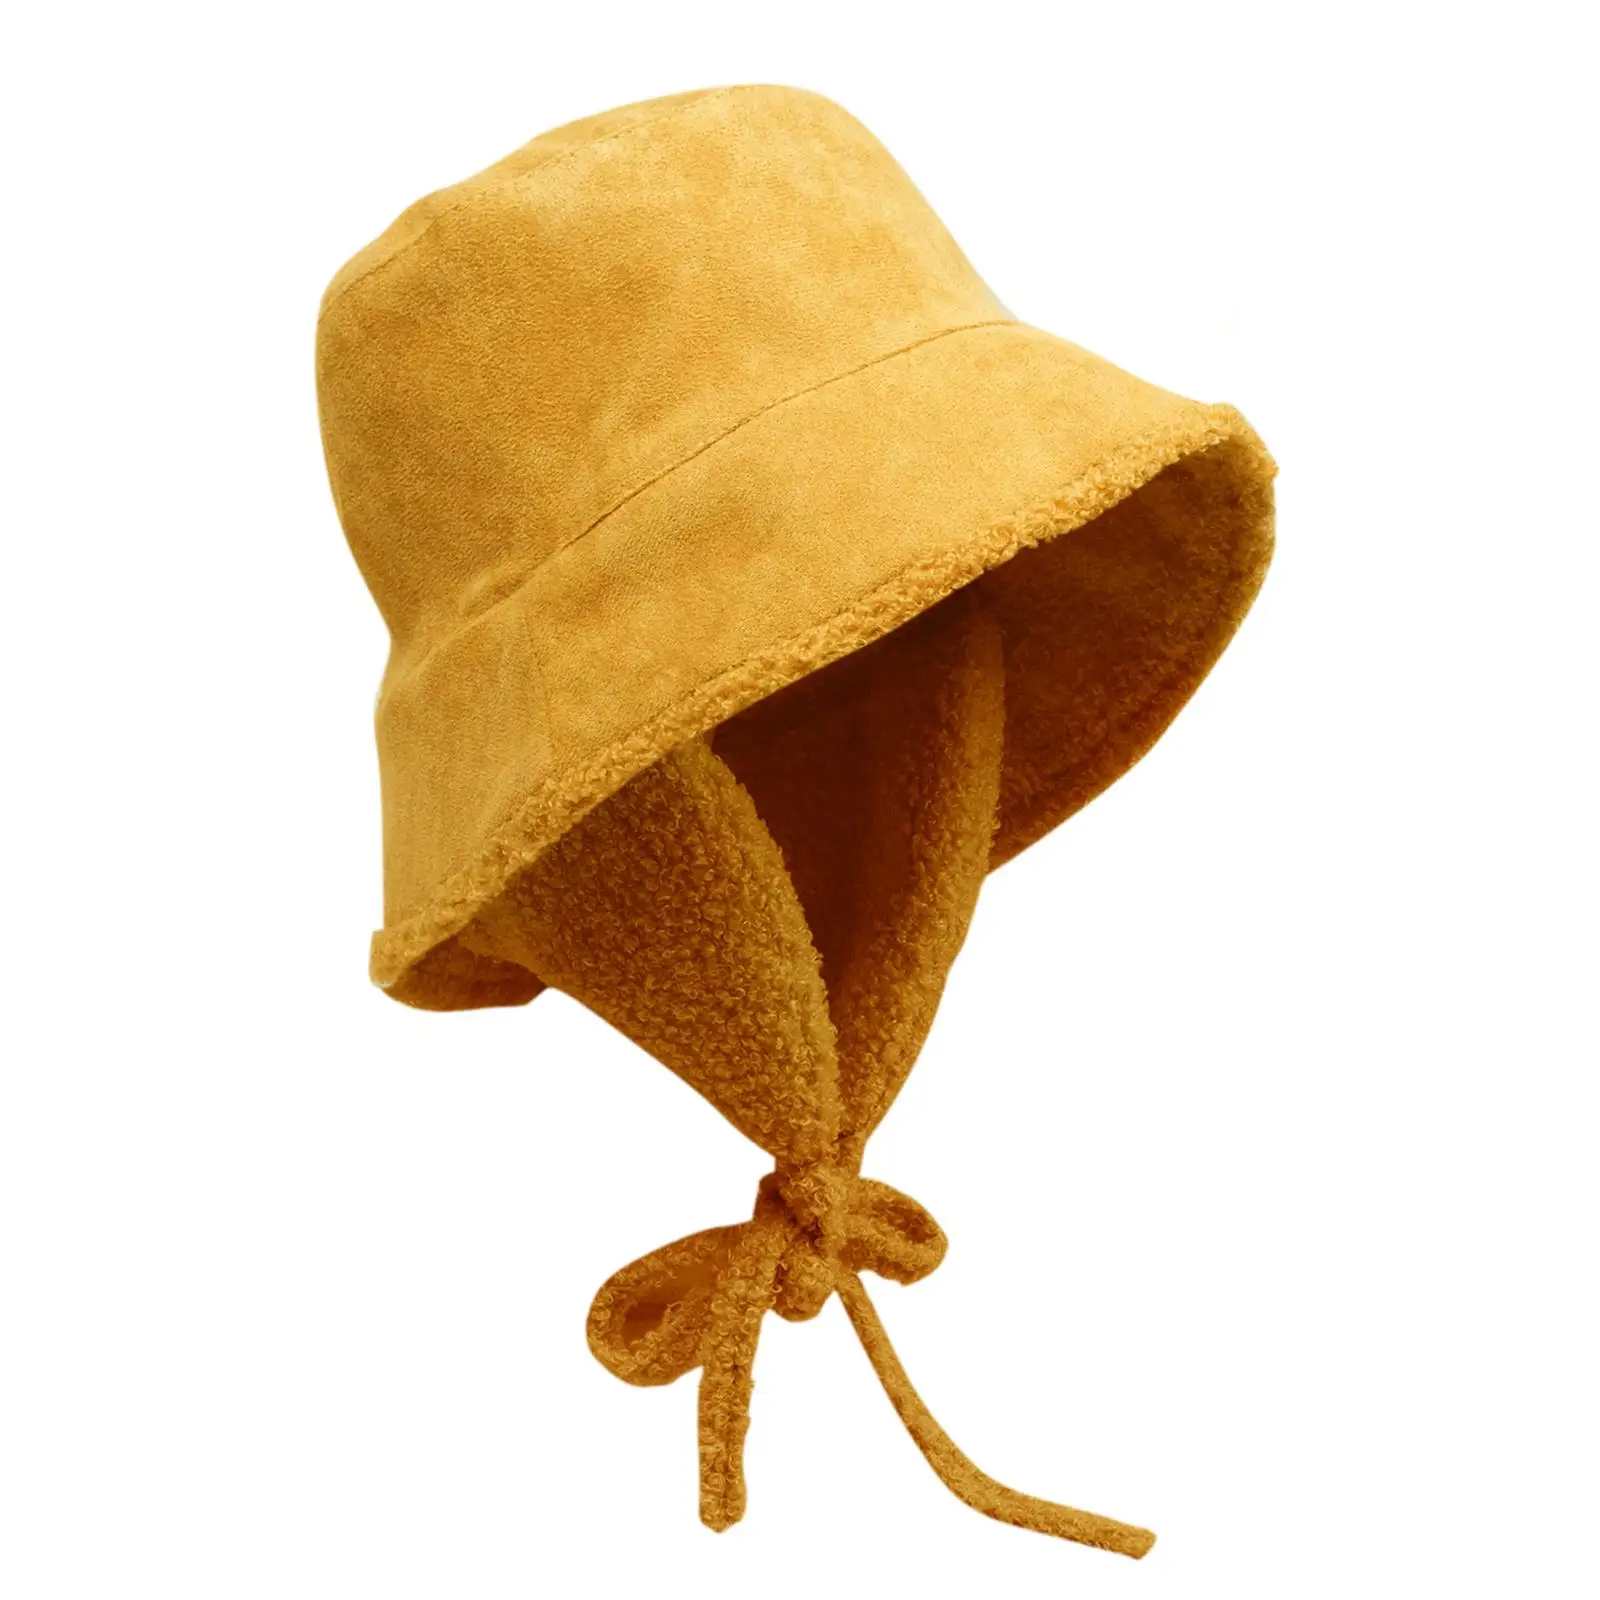 Warm Bucket Hat Soft with Ear Protection Fisherman Caps Furry Casual Winter Hat for Boys Girls Teens Travel Picnic Hiking